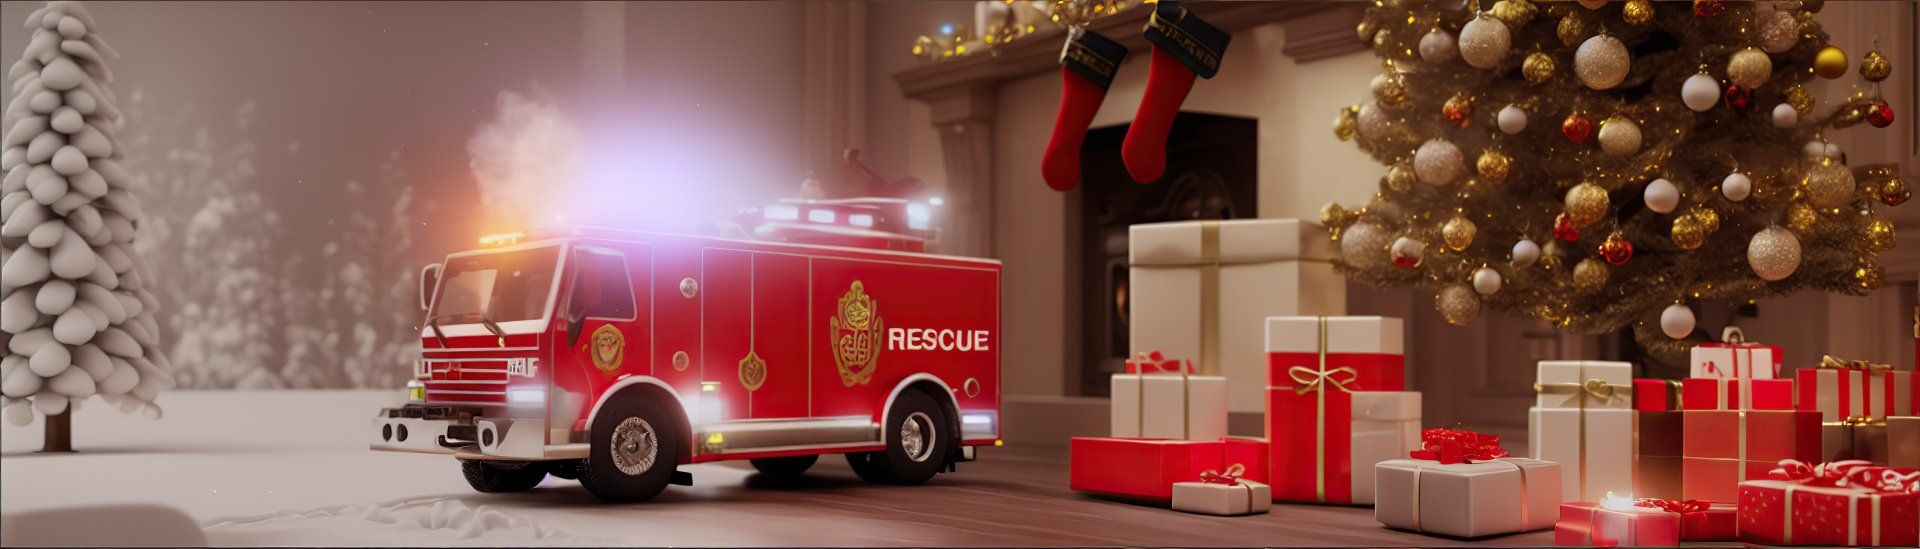 Amalgam of toy fire truck under Christmas tree and real fire truck responding to emergency in snow.